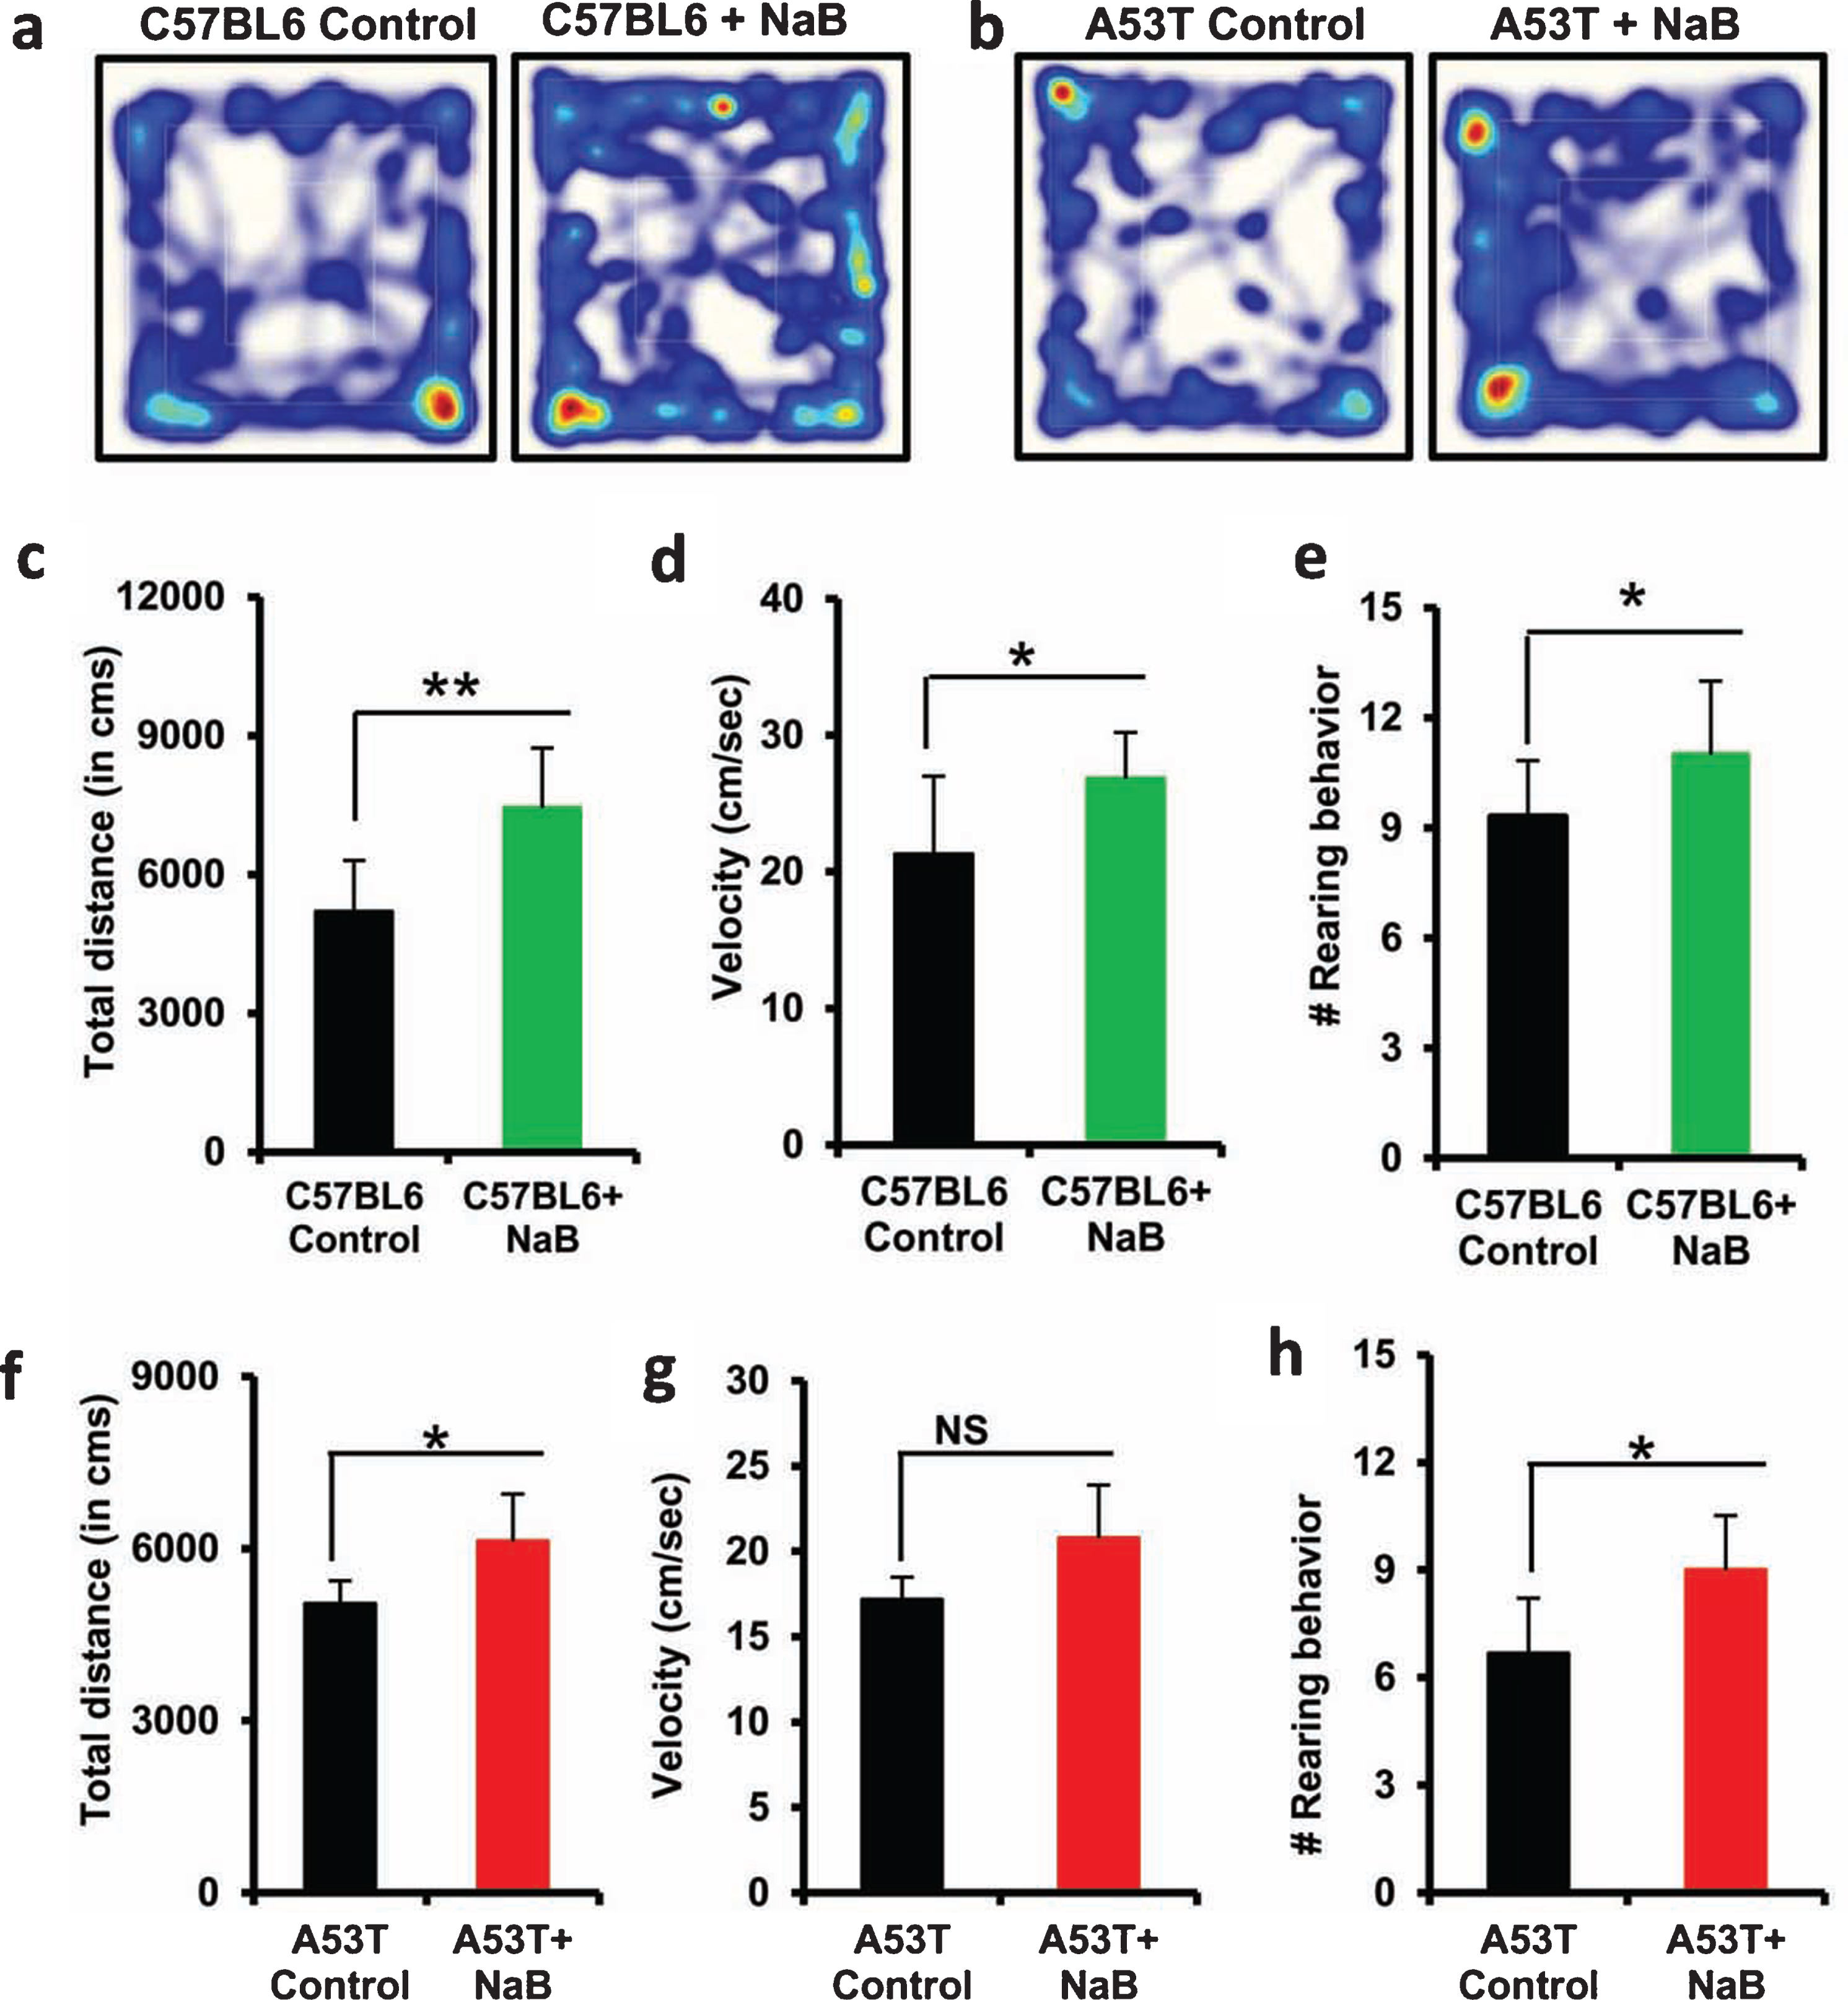 Improvement of locomotor activities in C57/BL6 and A53T-Tg mice by oral NaB. Male C57/BL6 (A, C-E) and A53T-Tg (B, F-H) mice (n = 5 per group) were treated with NaB (50 mg/kg body wt/d) mixed in 0.5% methylcellulose orally via gavage. Control mice received 0.5% methylcellulose as vehicle. After 30 d of treatment, locomotor activities were monitored (A and B, track plot; C and F, distance traveled; D and G, velocity; E and H, rearing). Results are mean±SEM of five mice per group. **p < 0.01; *p < 0.05 versus control by two-tailed paired t-tests. NS, not significant.